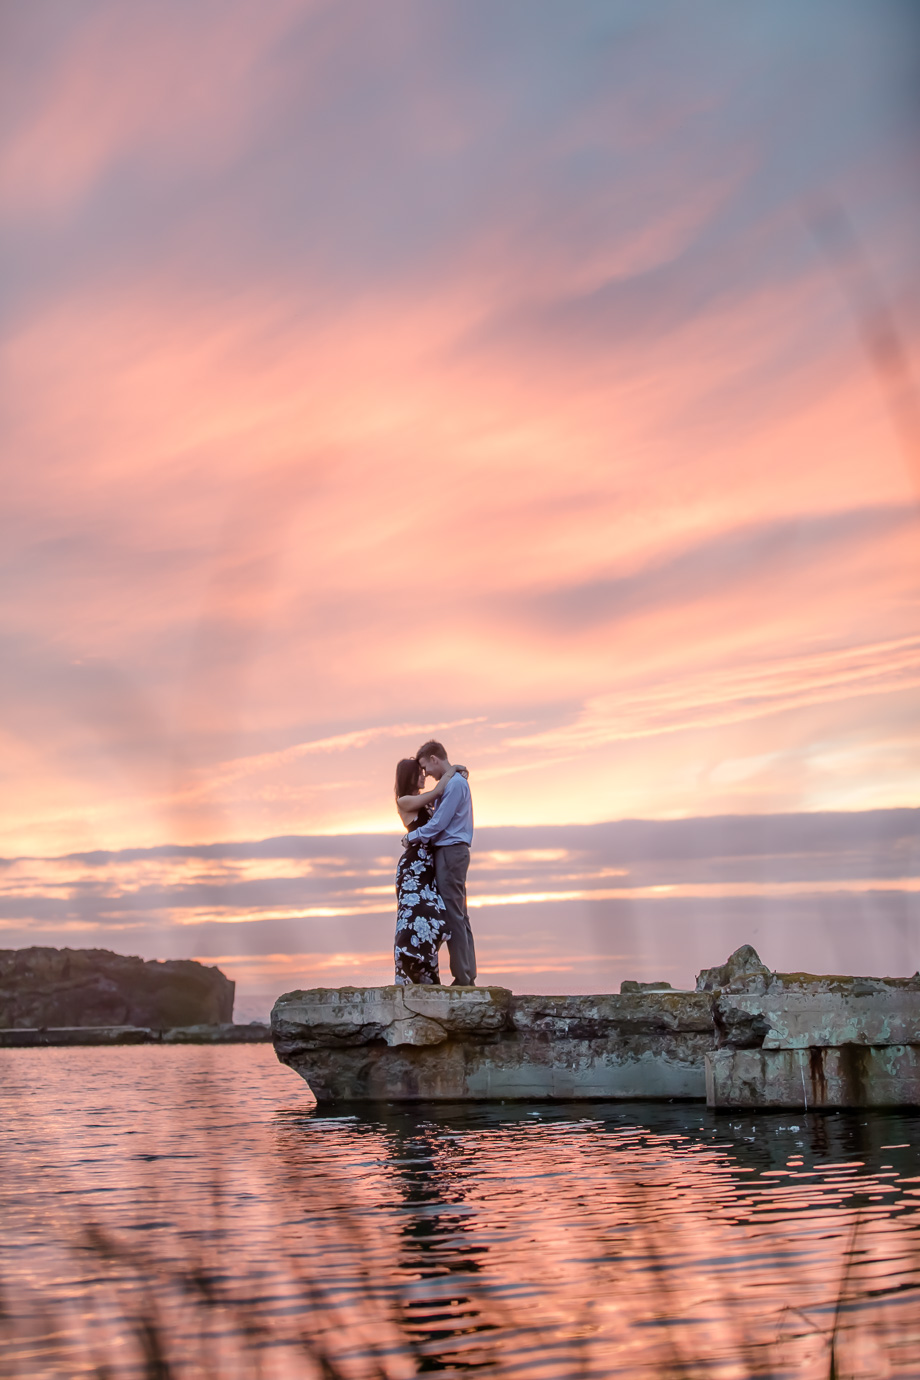 lands end sutro baths cloudy pink sunset reflection engagement picture